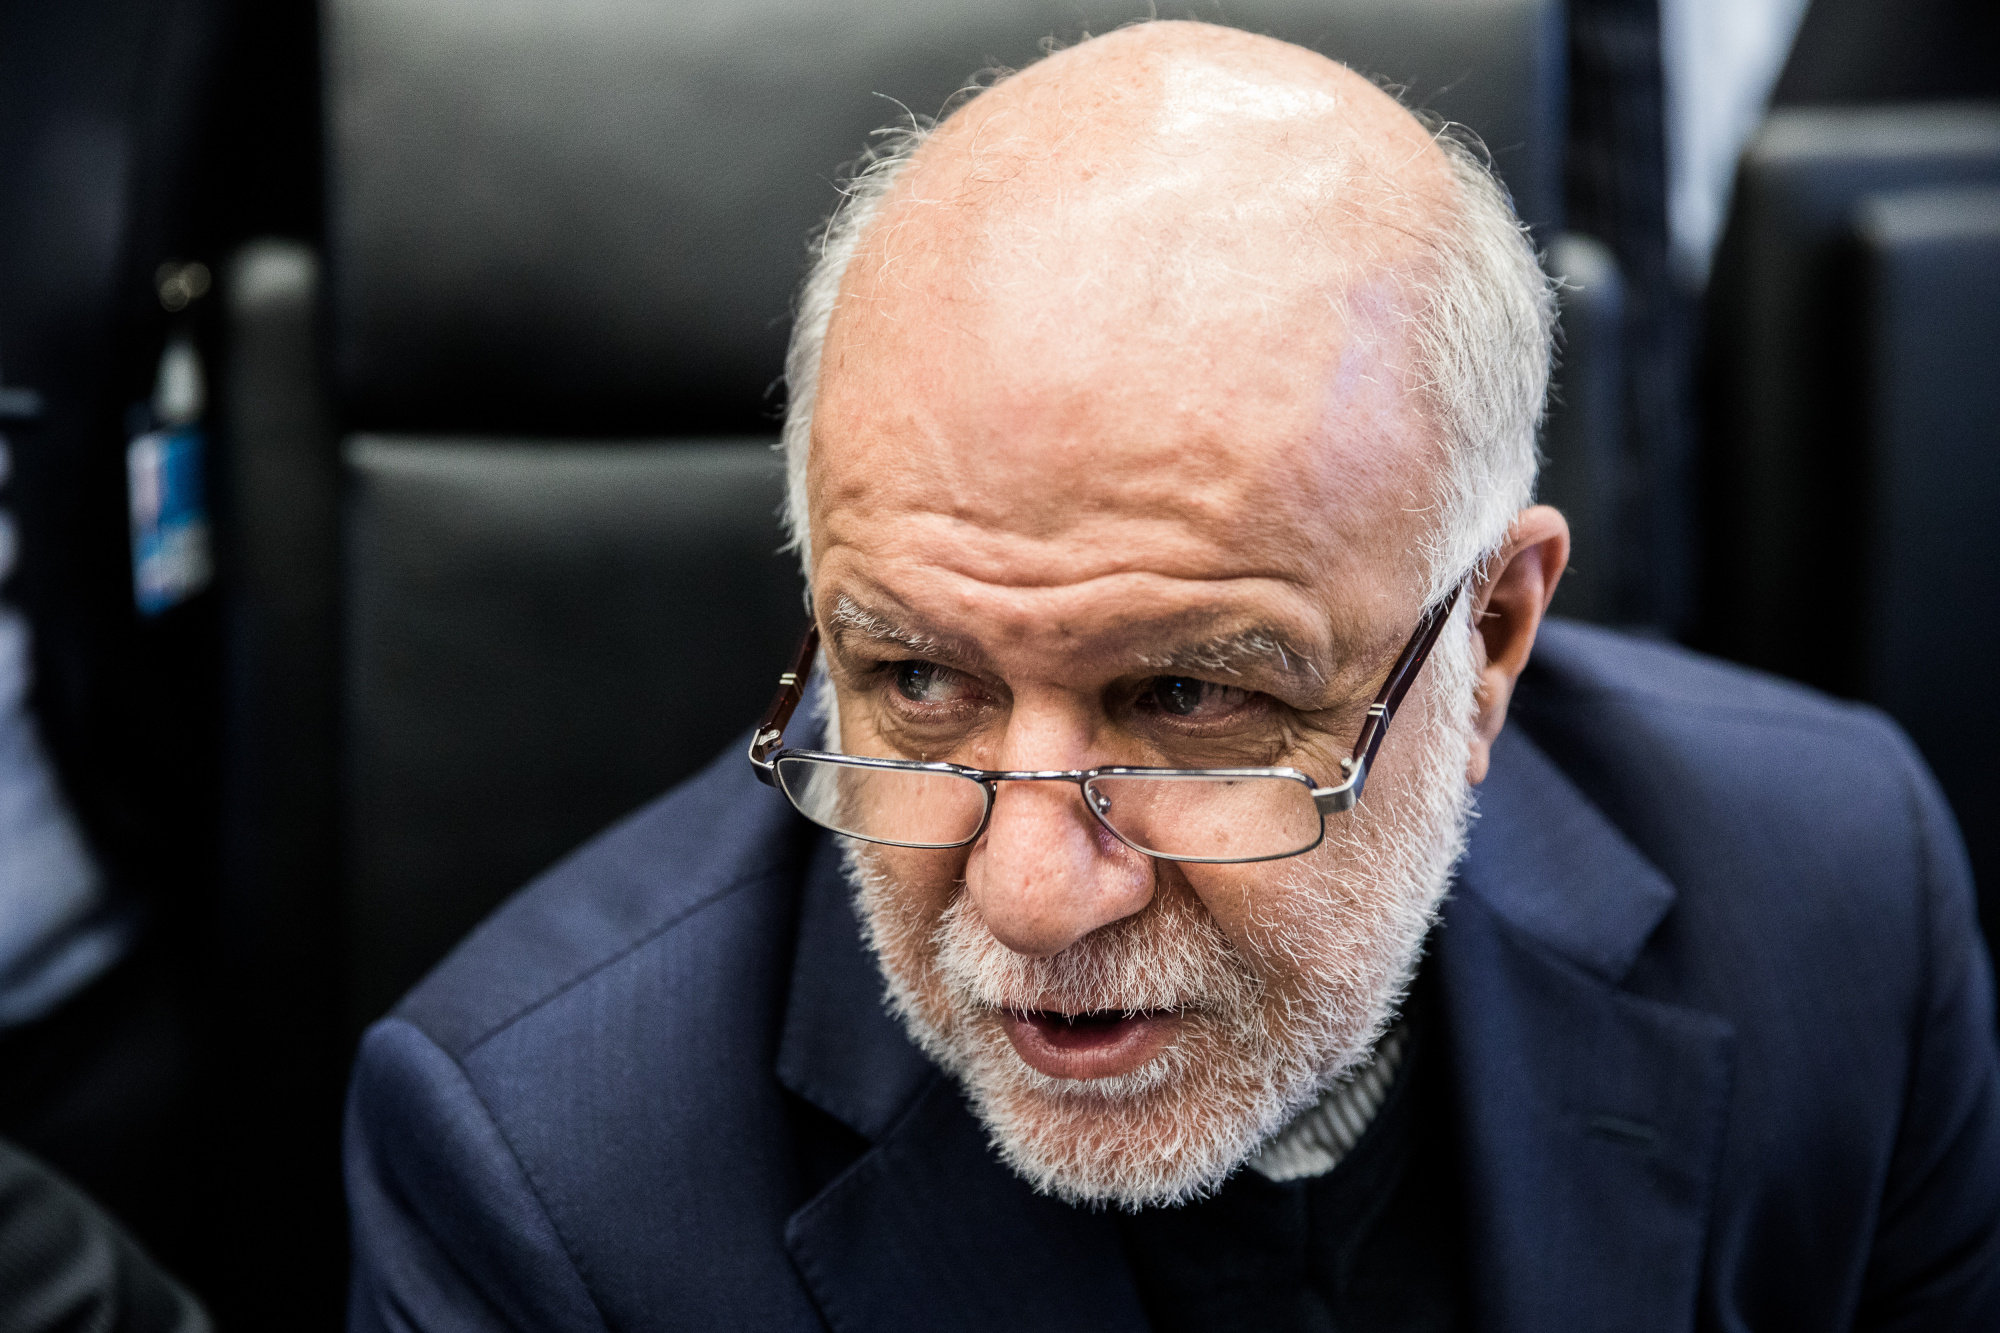 The US has imposed sanctions on a number of Iranian interests, including Minister of Petroleum Bijan Zanganeh who has rejected the move.